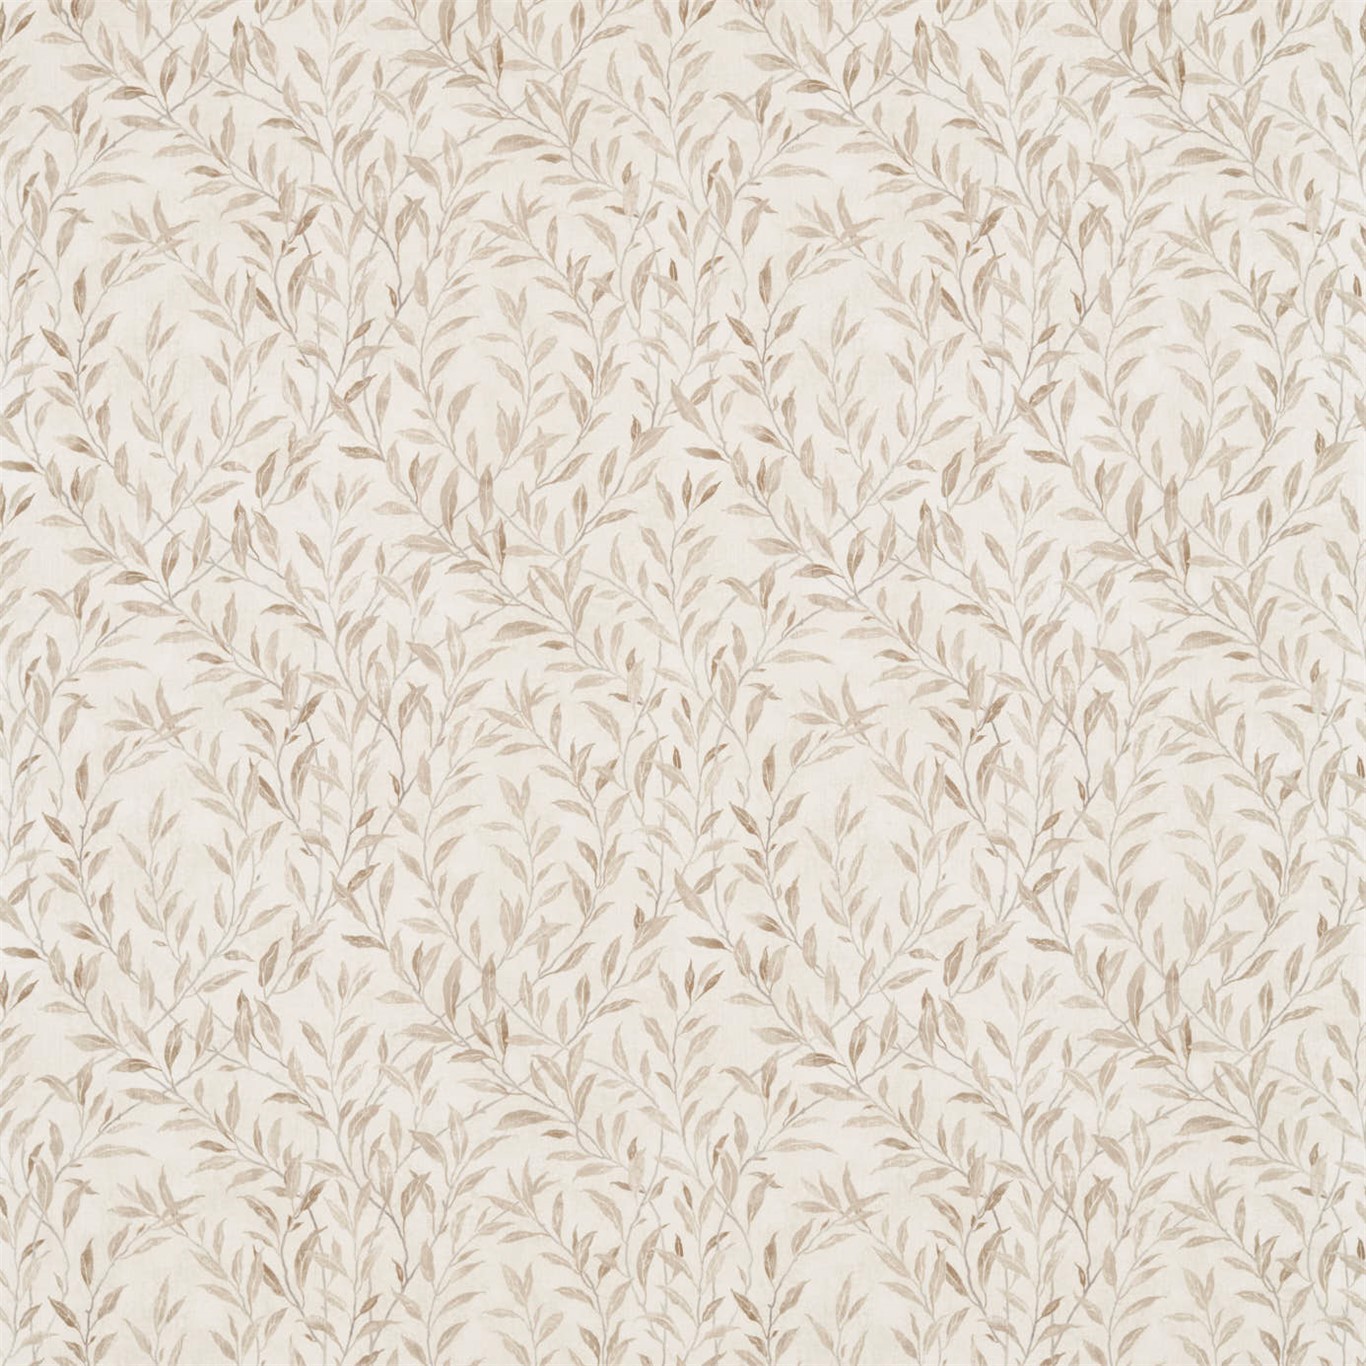 Osier Parchment/Stone Fabric by SAN